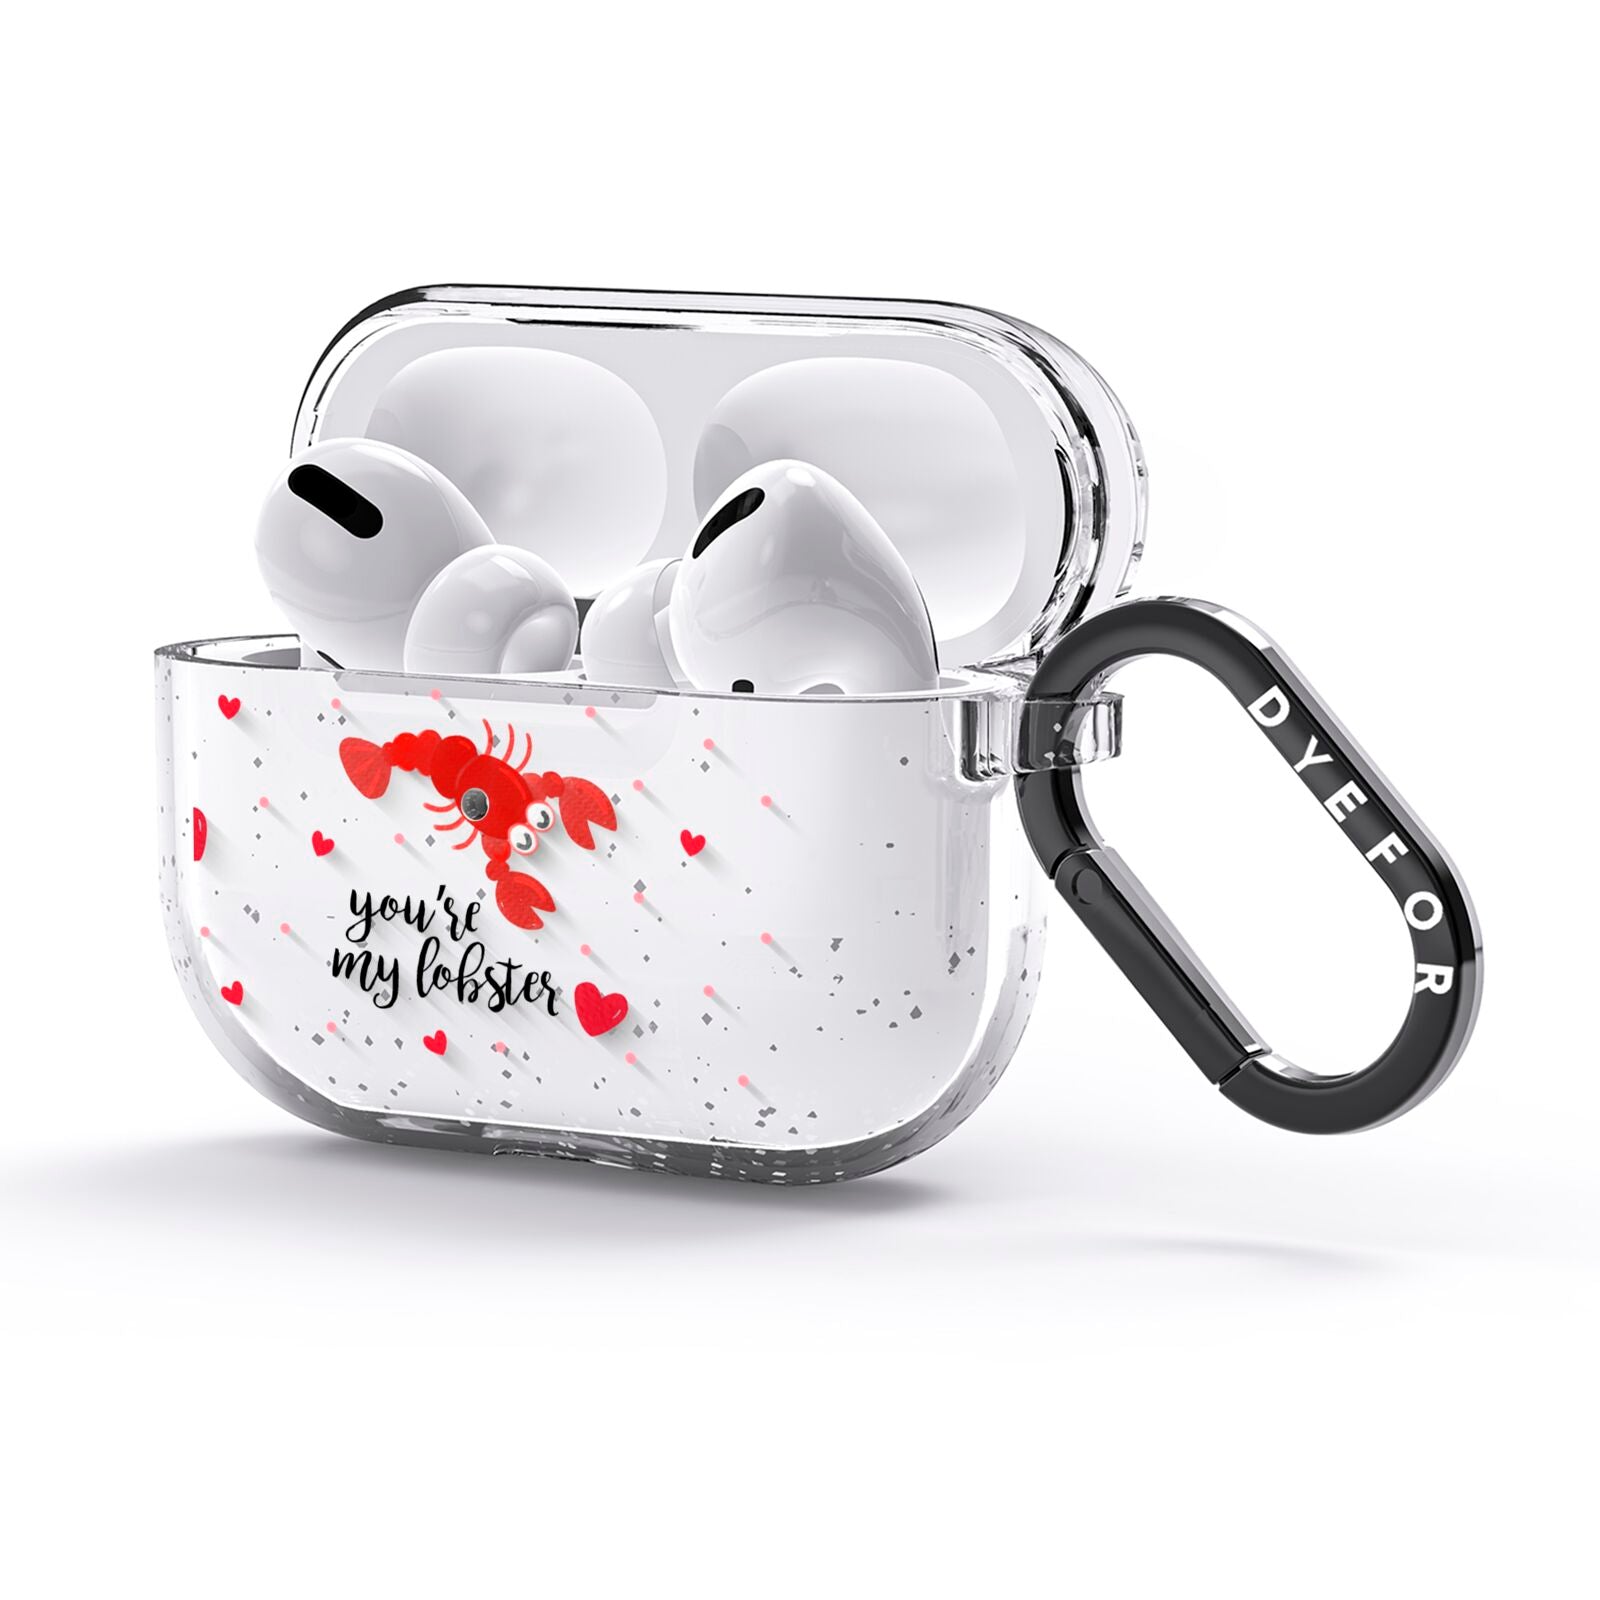 Youre My Lobster AirPods Glitter Case 3rd Gen Side Image